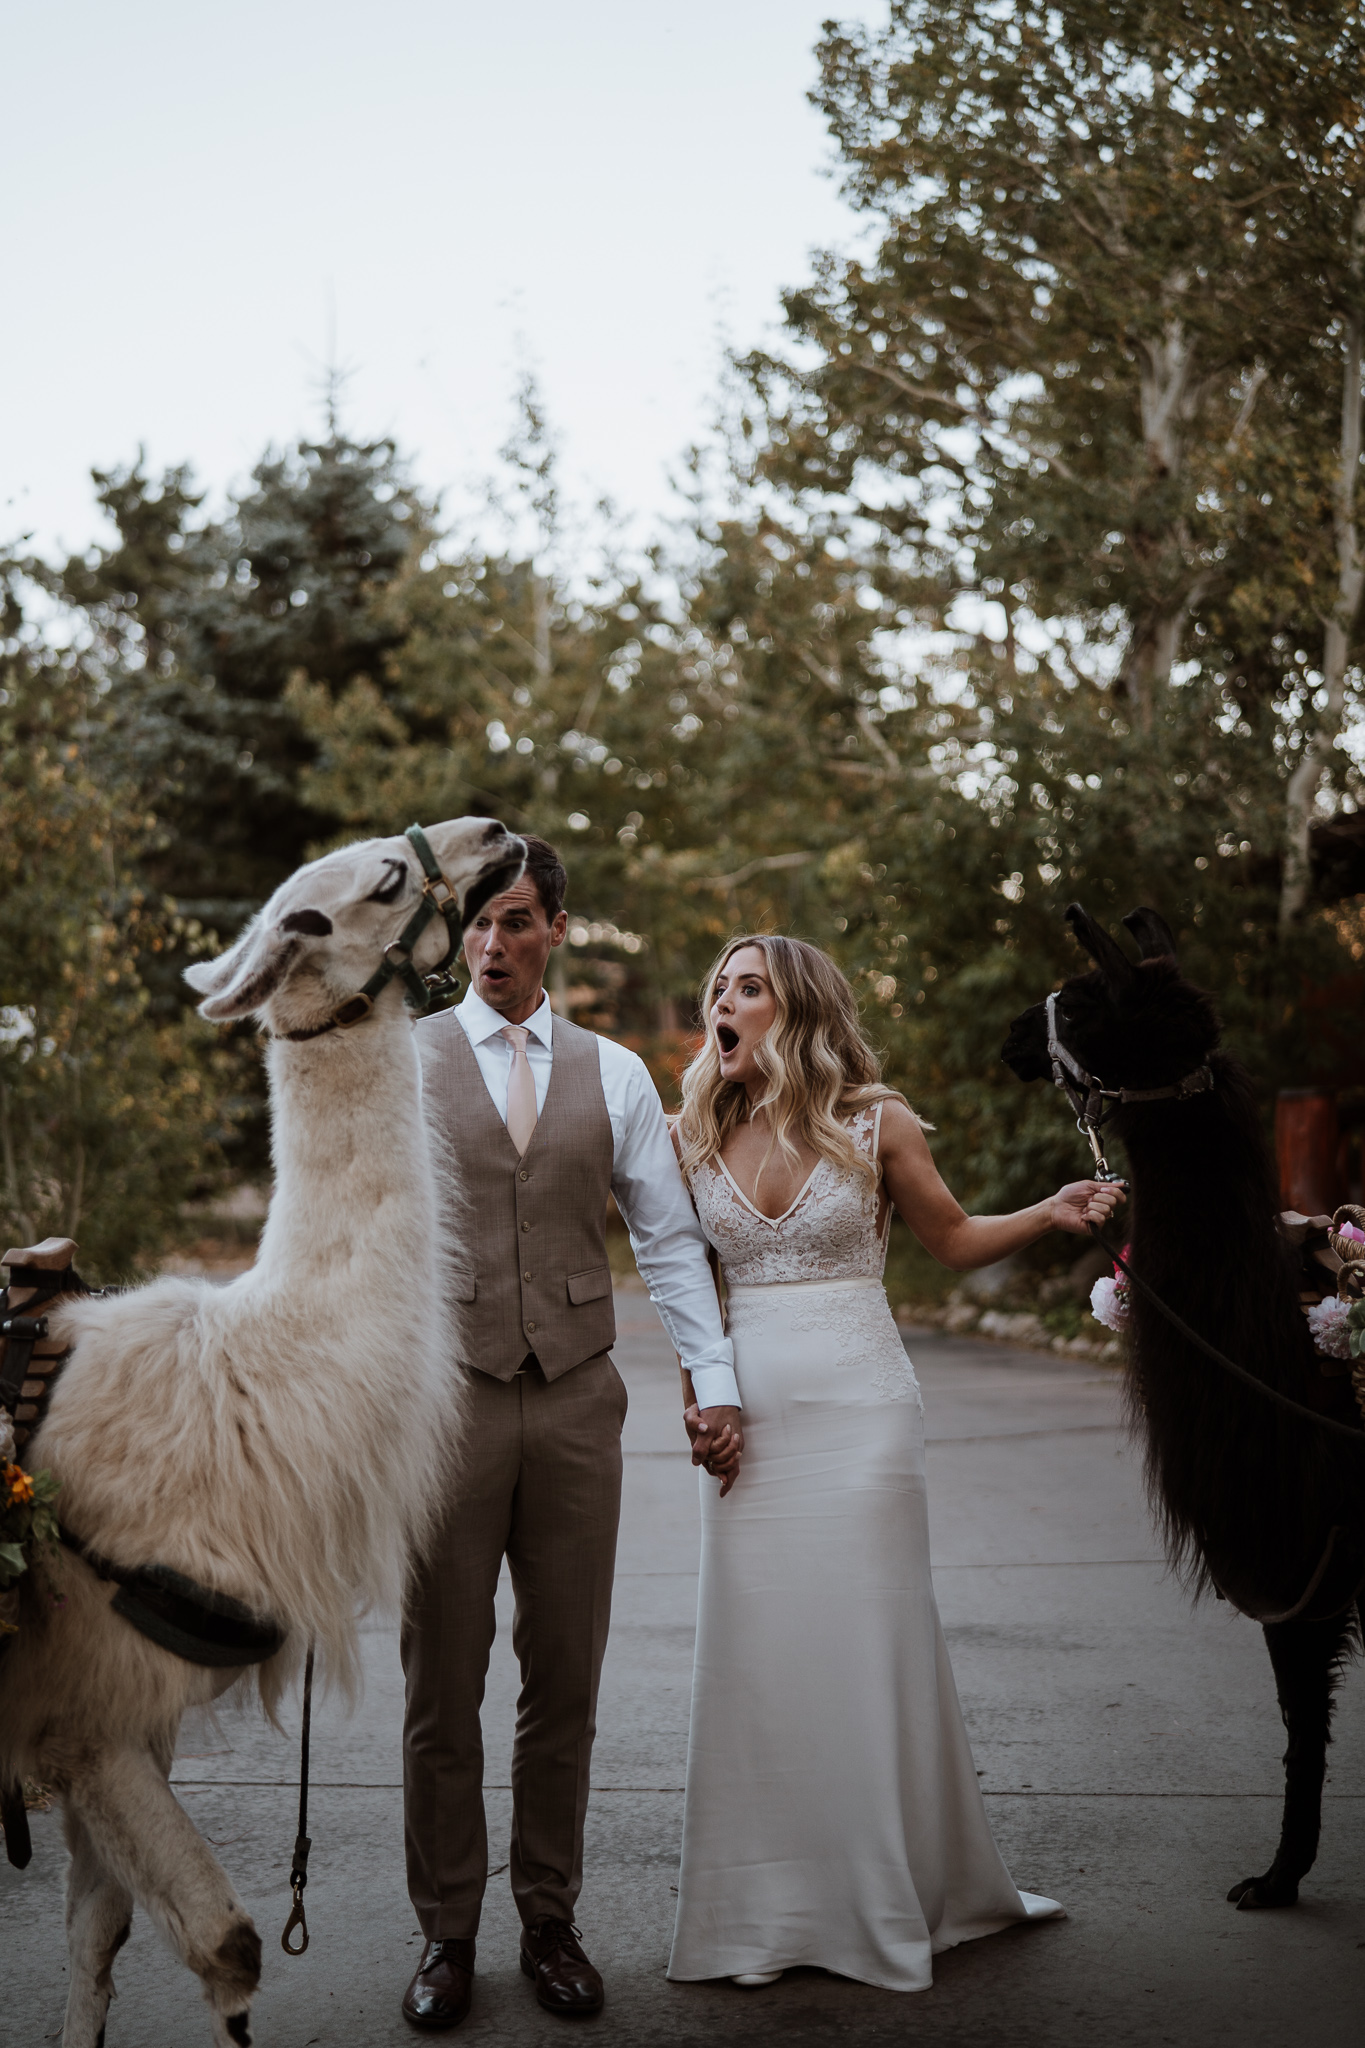 Wedding picture with llamas!